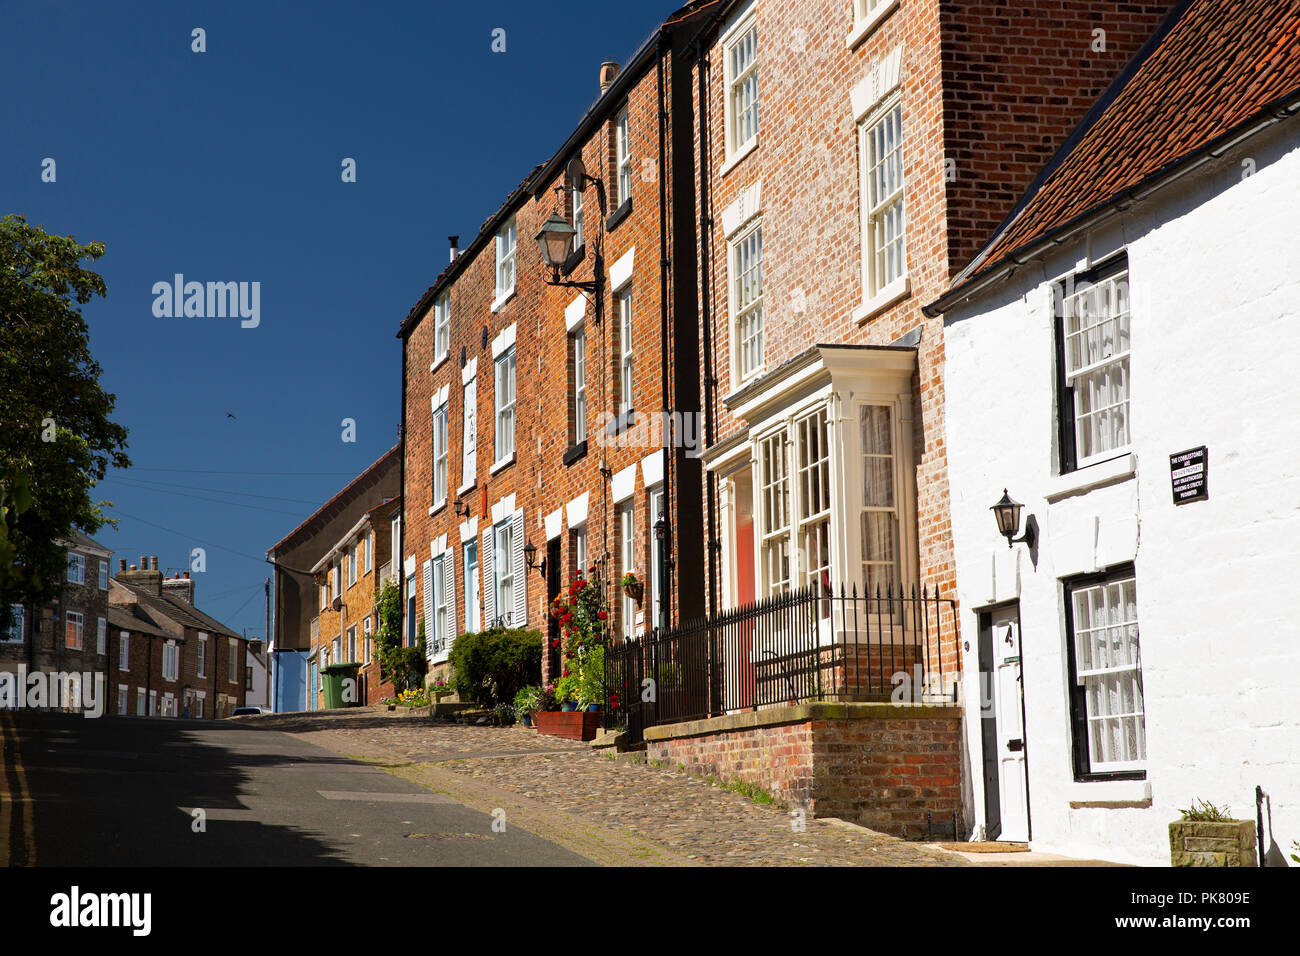 UK, England, Yorkshire, Filey, Church Street, historic houses in old part of town Stock Photo